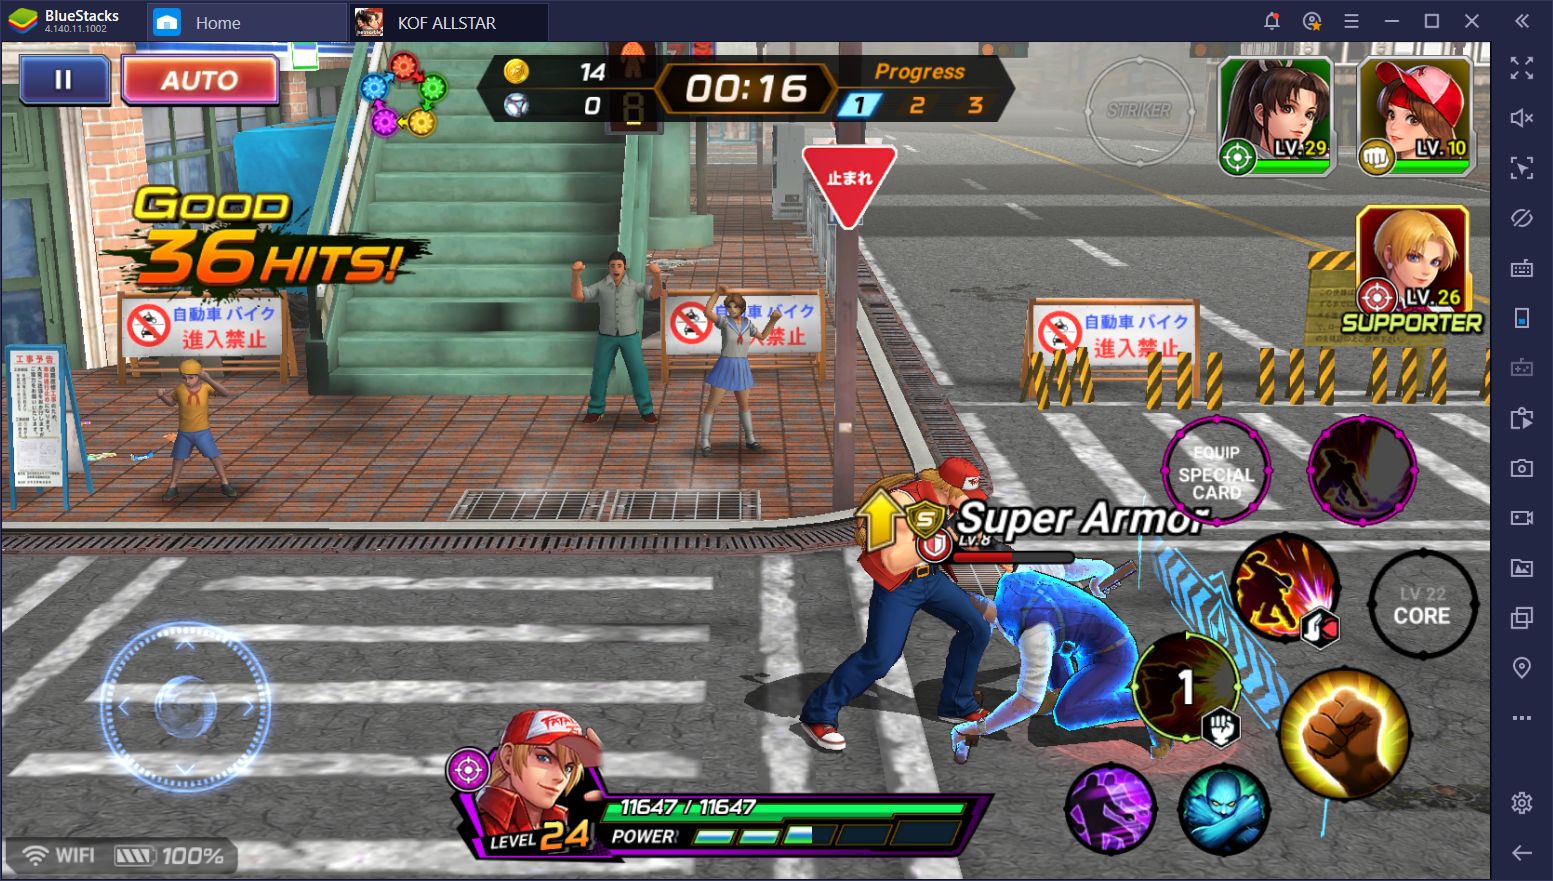 Kick Butts in The King of Fighters ALLSTAR on PC With These Combat